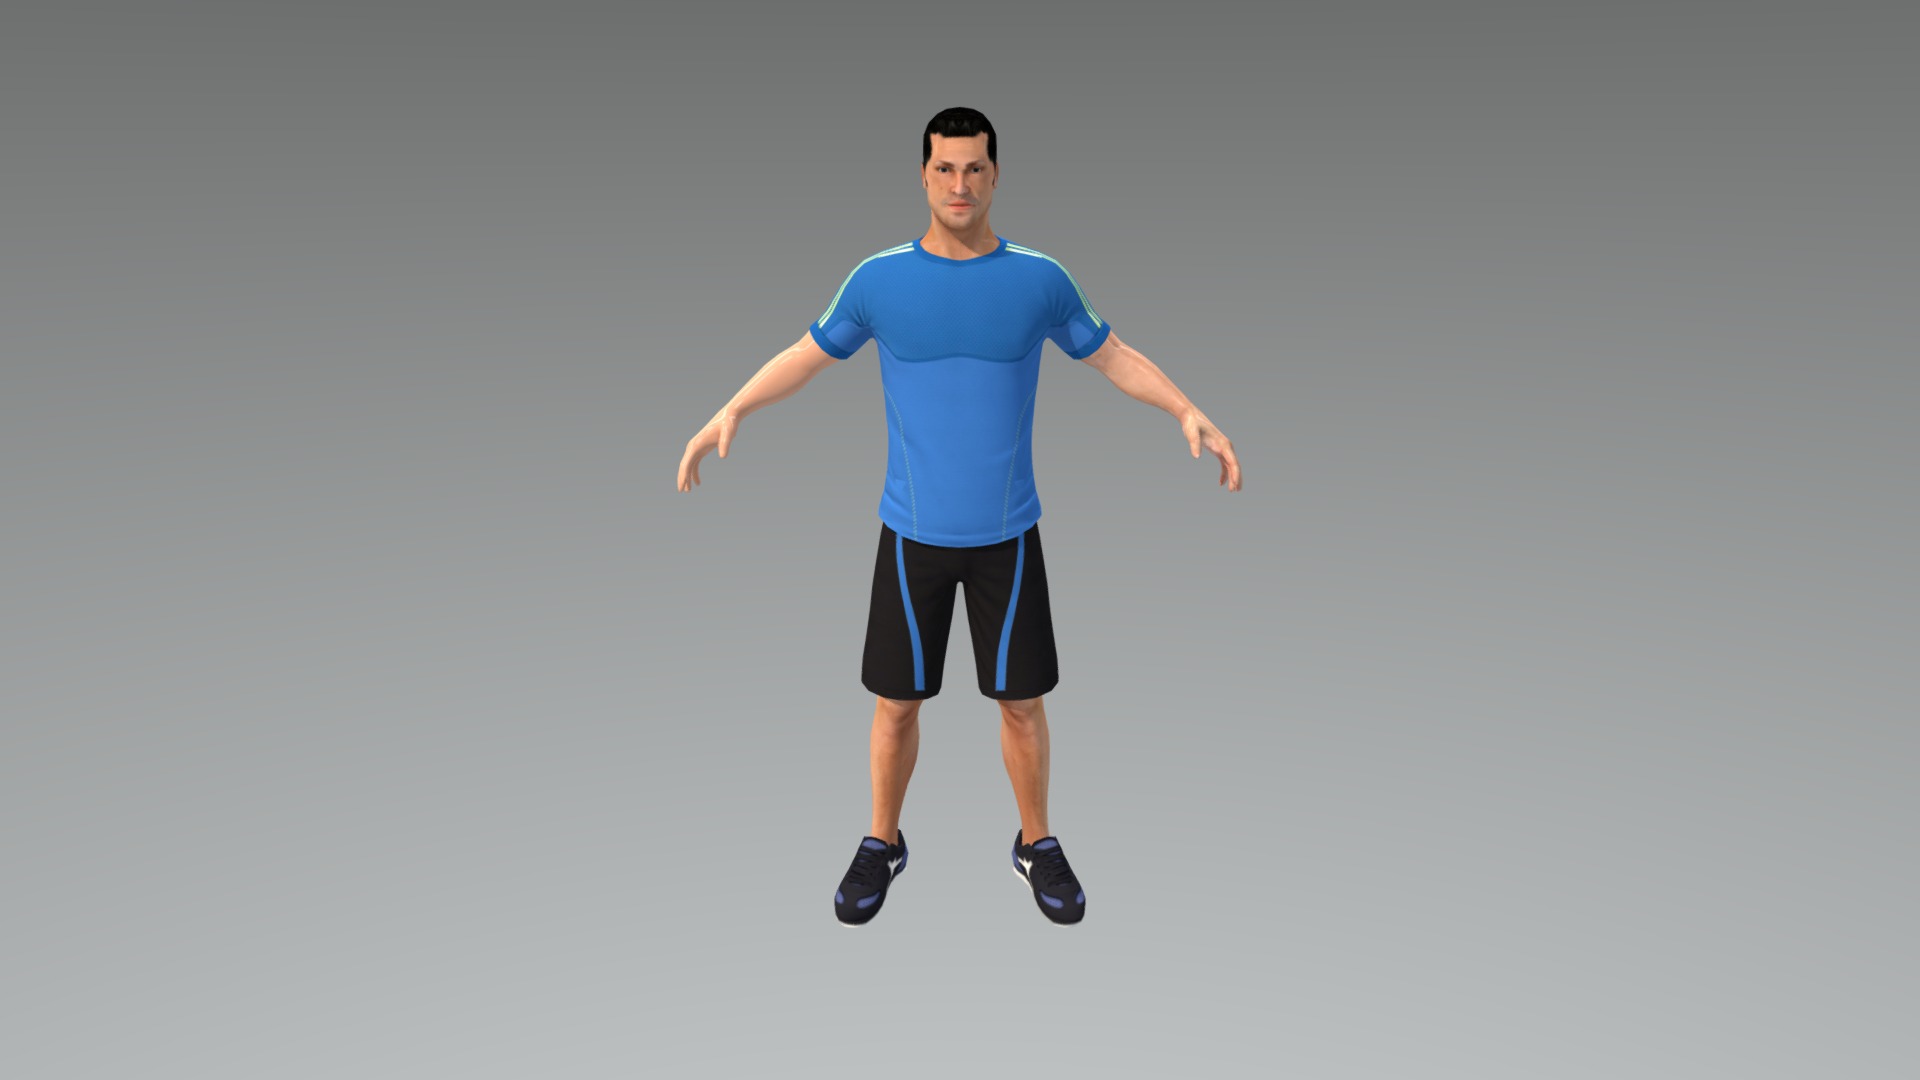 3D model Coach Final - This is a 3D model of the Coach Final. The 3D model is about a man in a blue shirt.